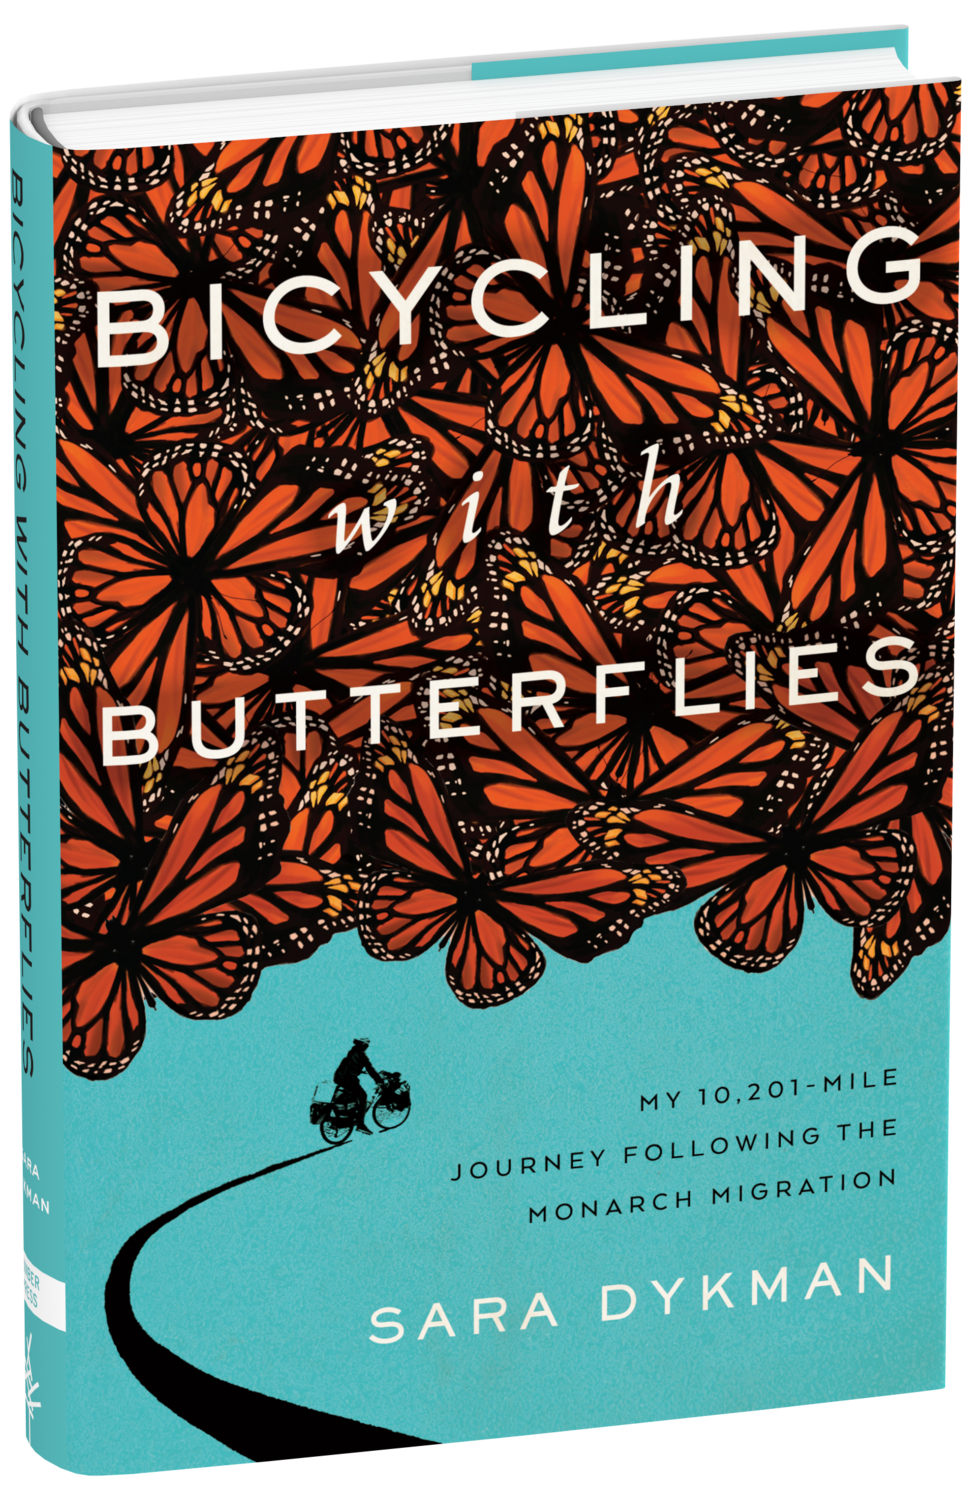 Bicycling with Butterflies book